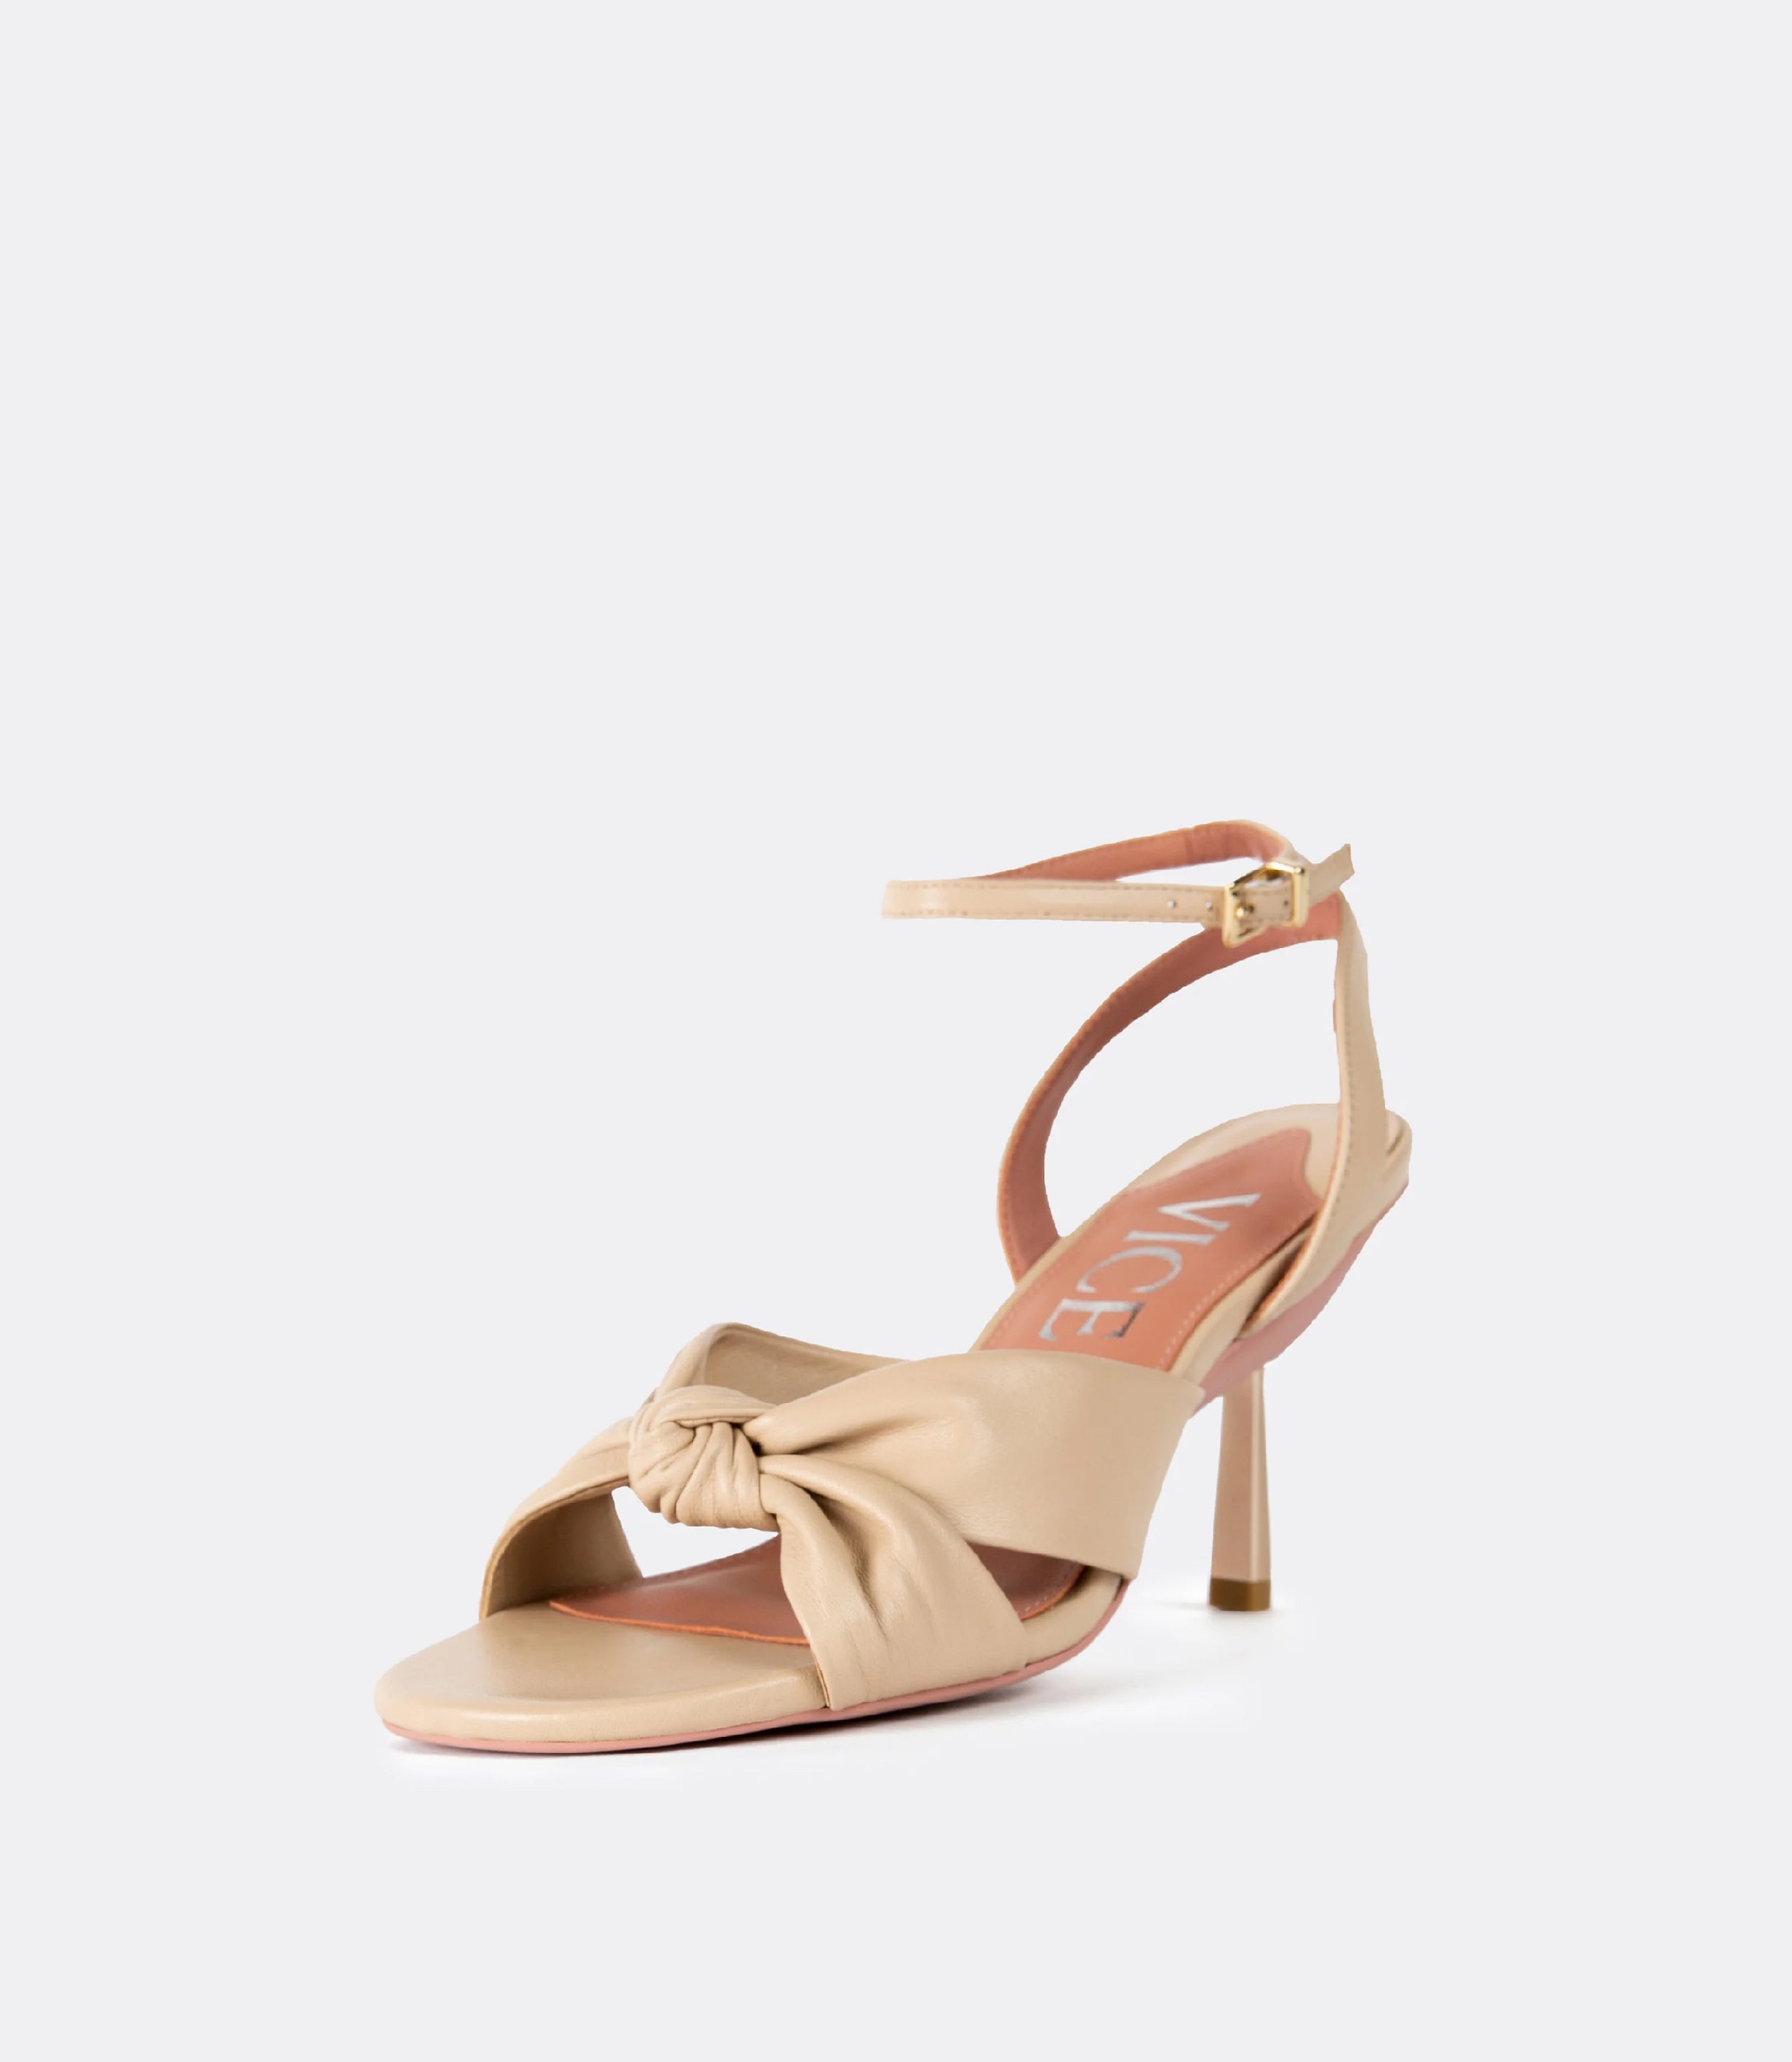 Front view of the beige leather sandal as a heel.